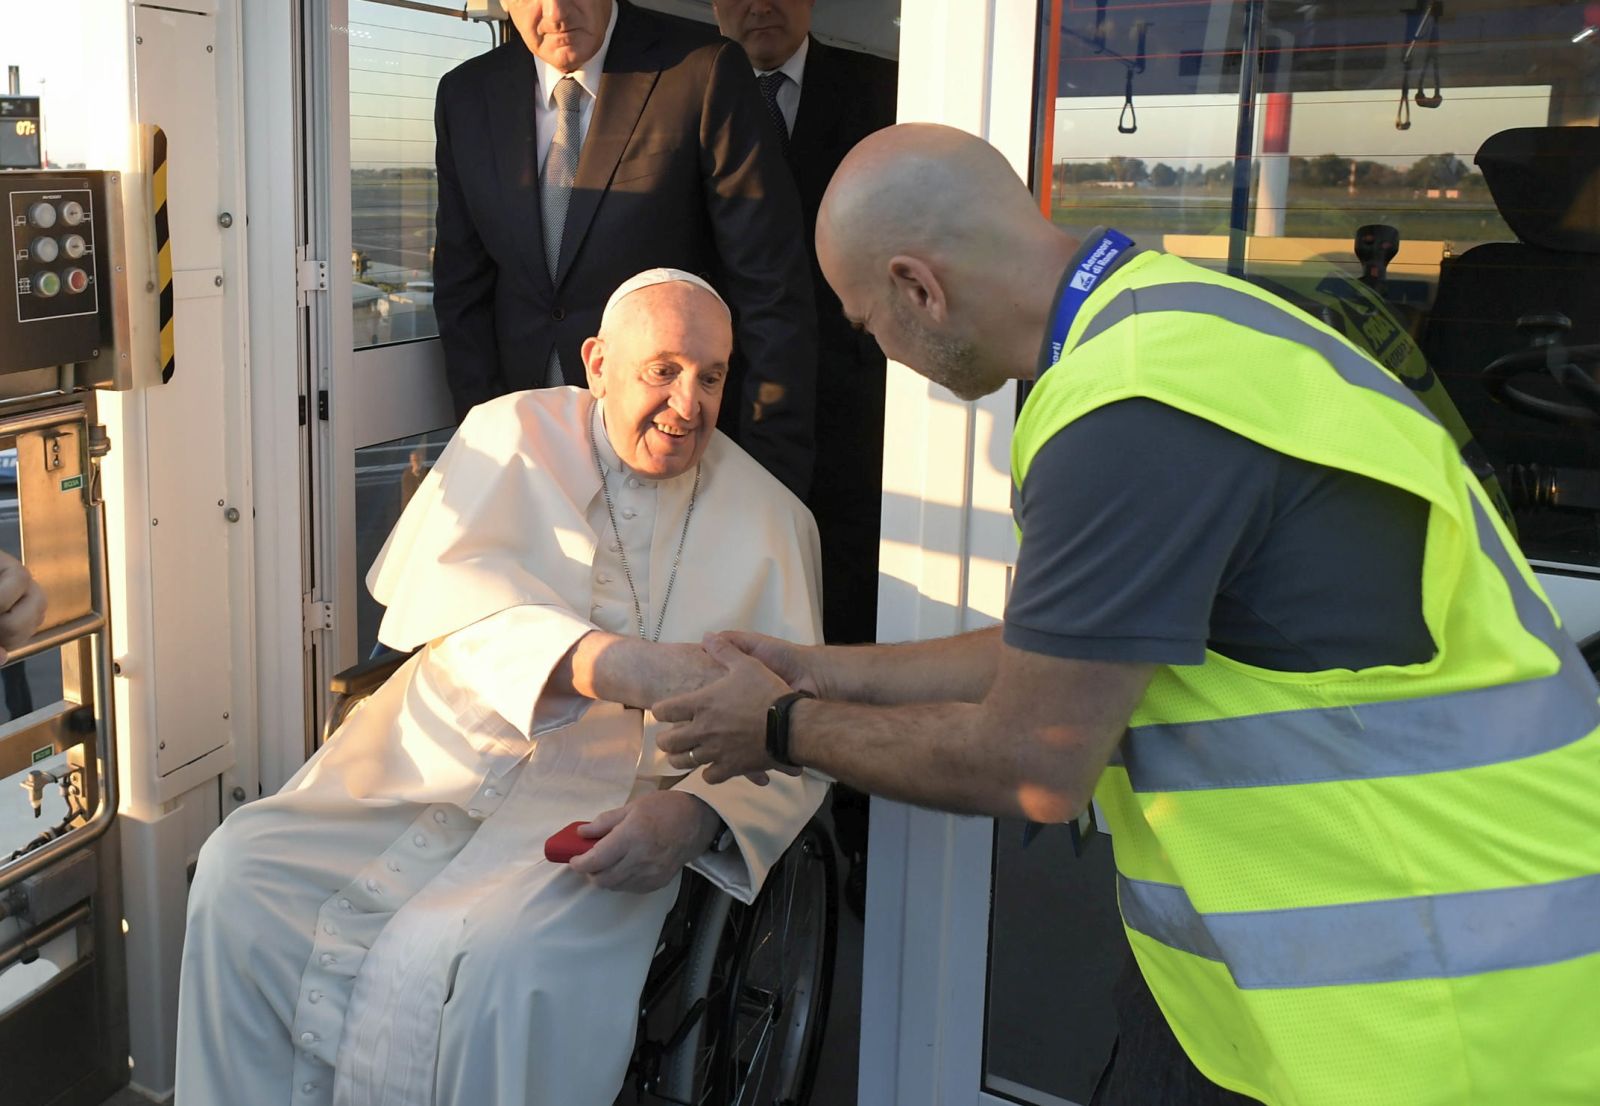 epa10180890 A handout picture provided by the Vatican Media shows Pope Francis (C) boarding a plane from a lift designed for the boarding and disembarking of reduced mobility passengers, at Fiumicino Leonardo Da Vinci Airport, Italy, 13 September 2022. Pope Francis departs for a three-day trip to Kazakhstan.  EPA/VATICAN MEDIA HANDOUT  HANDOUT EDITORIAL USE ONLY/NO SALES